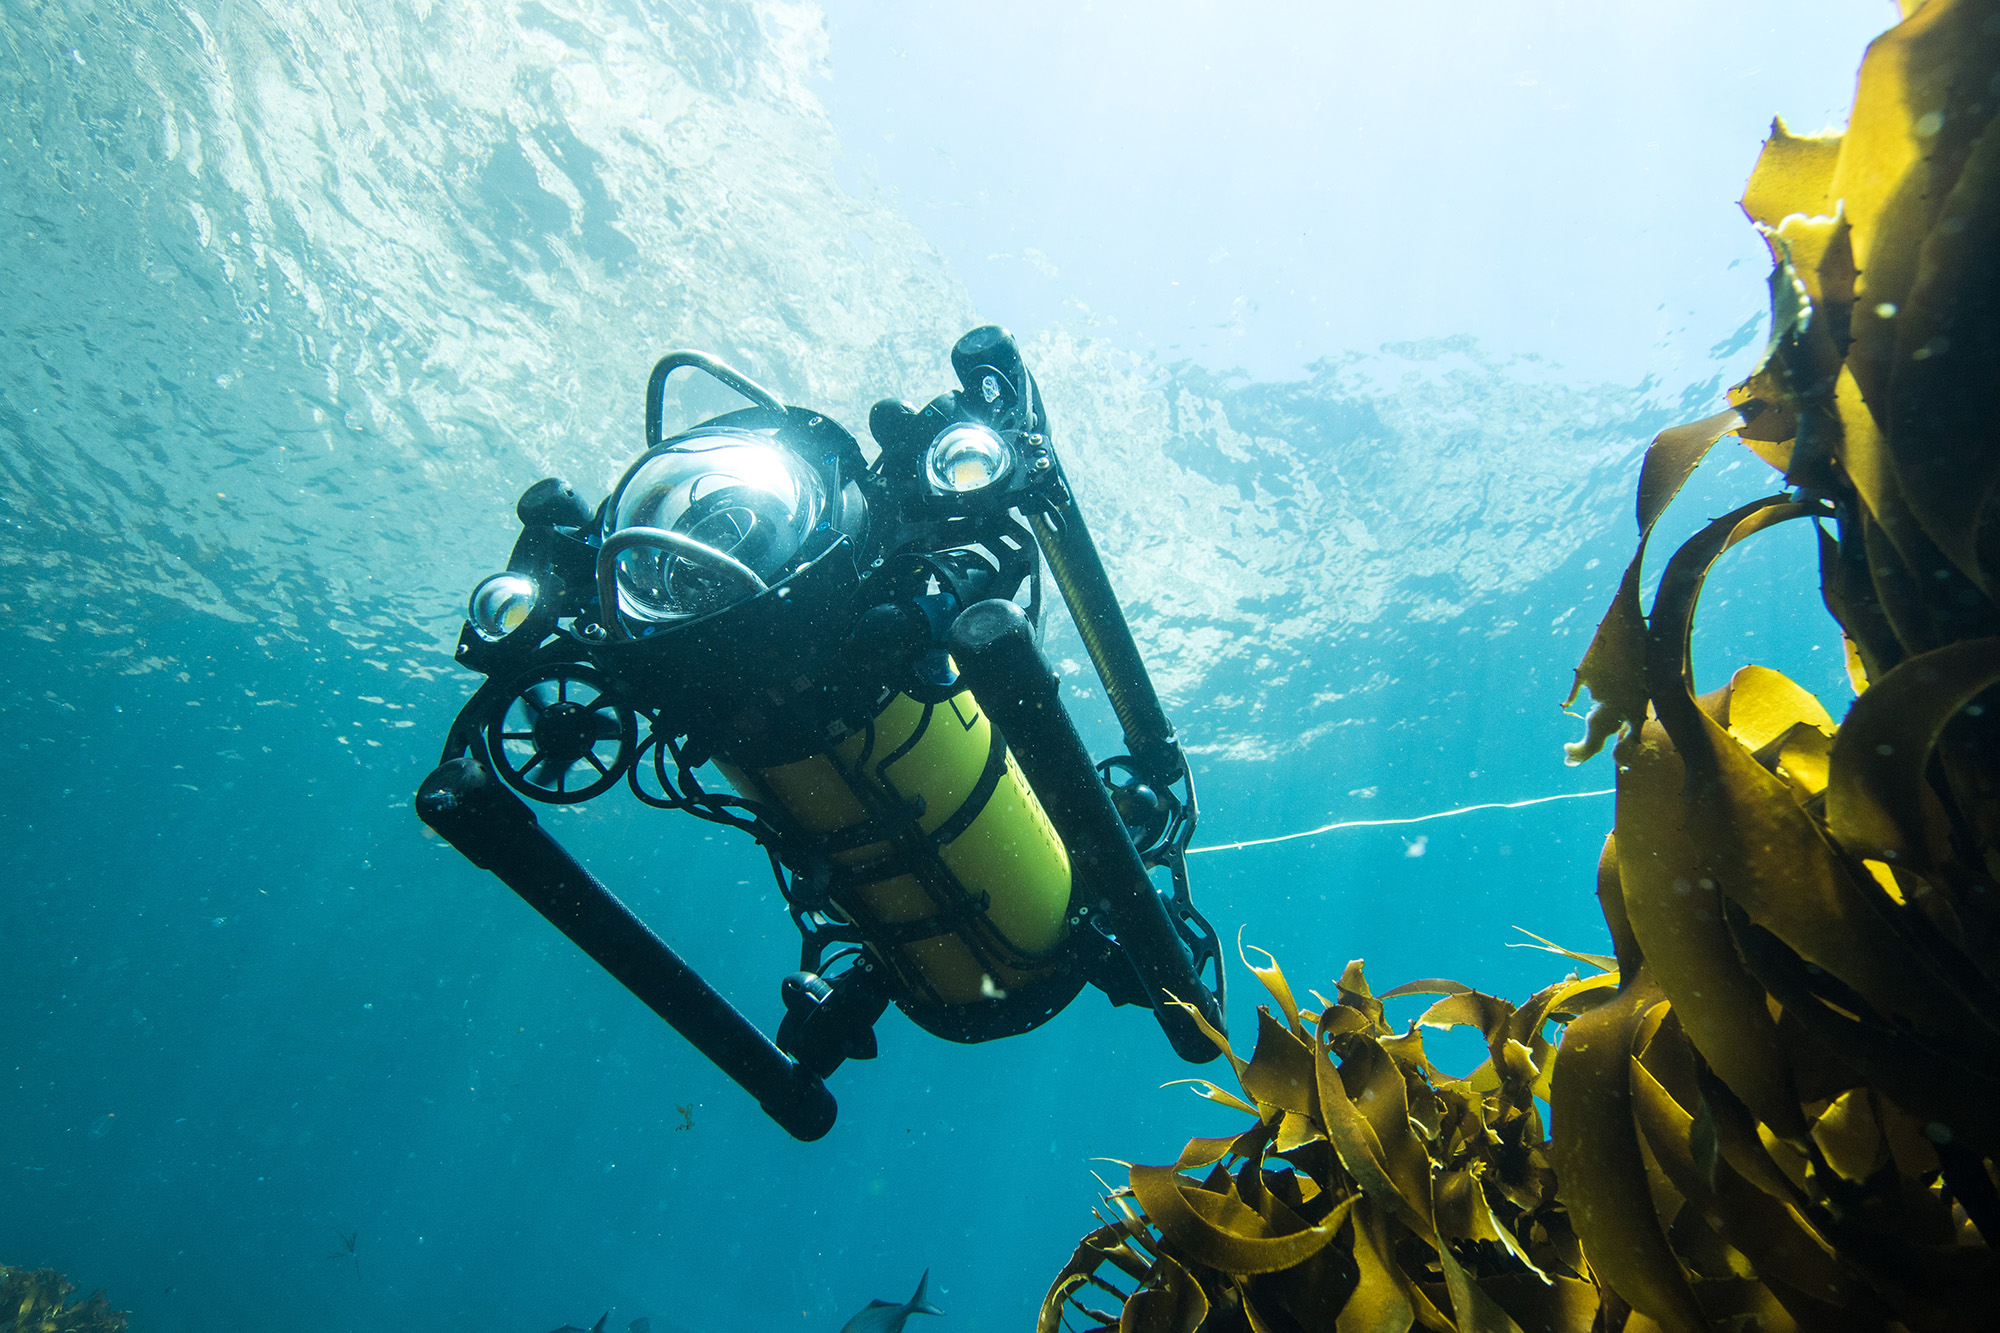 Upgrade Your Boxfish to an Autonomous ROV in the Future